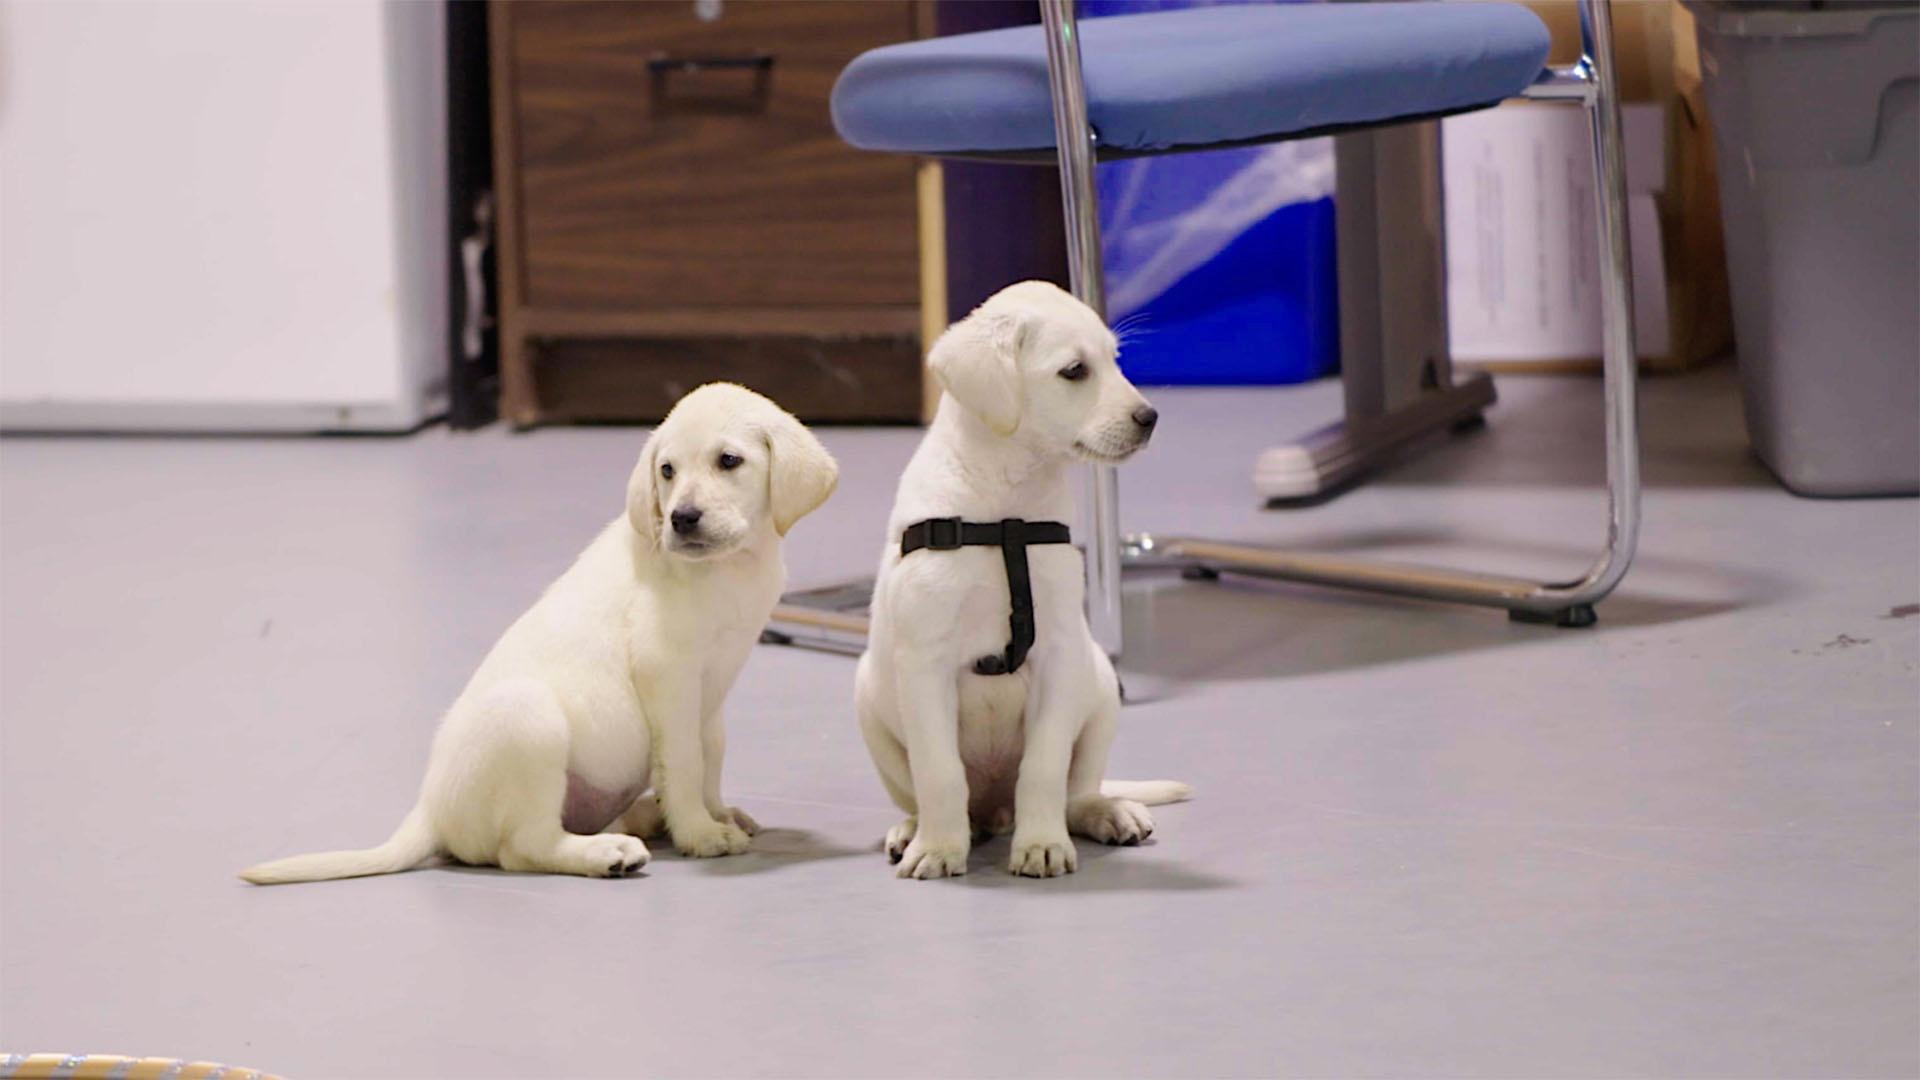 Two new service dog puppies arrive at Patriot Paw Headquarters in Dallas, Texas.